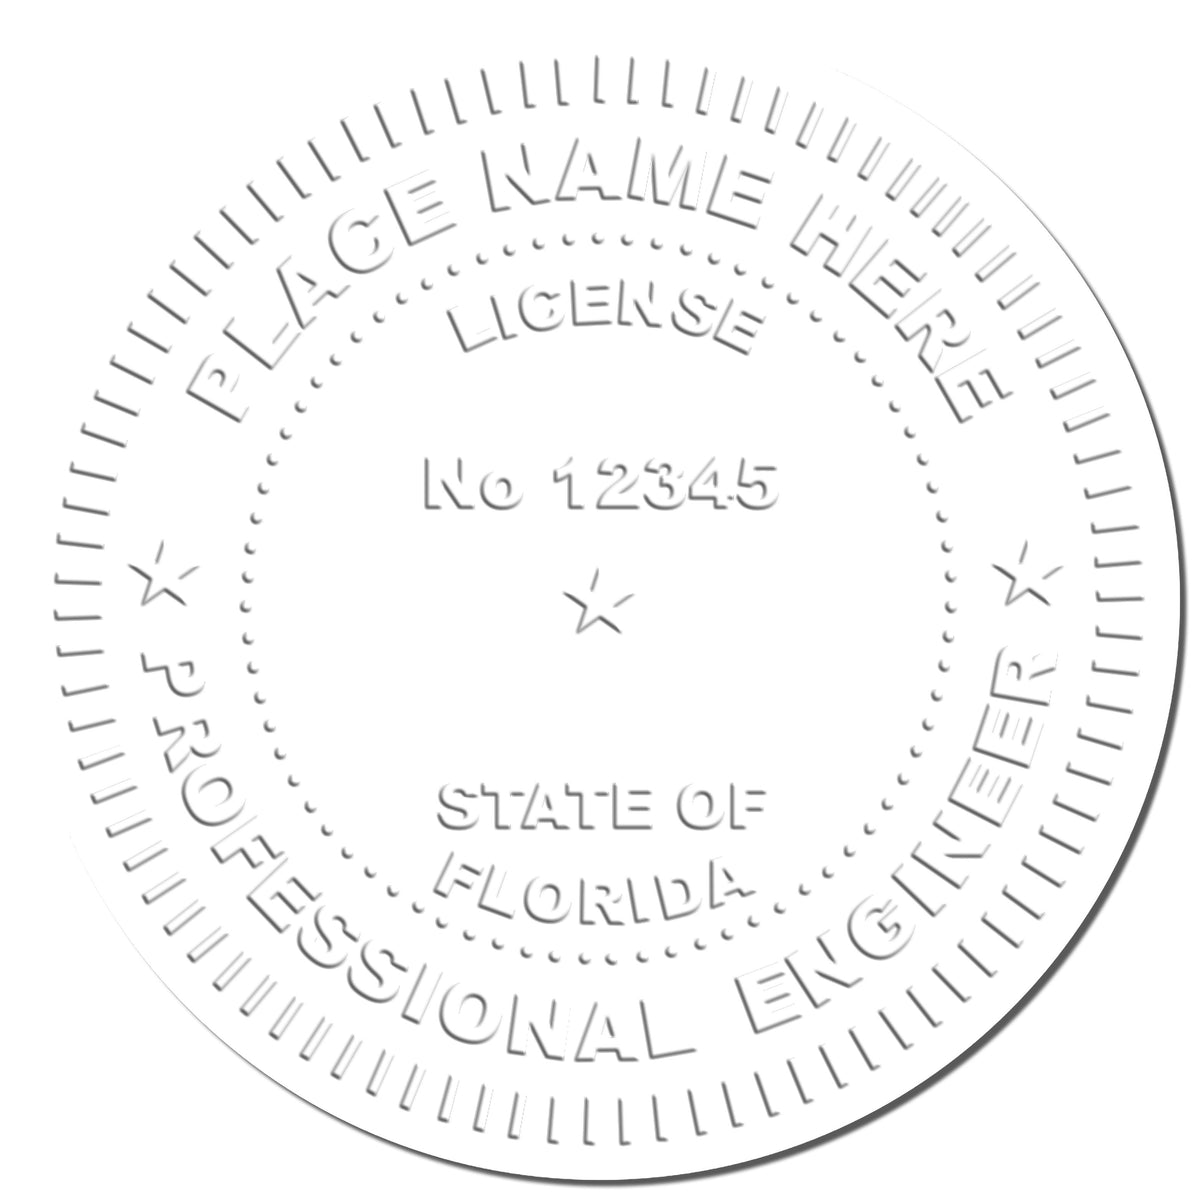 This paper is stamped with a sample imprint of the Gift Florida Engineer Seal, signifying its quality and reliability.